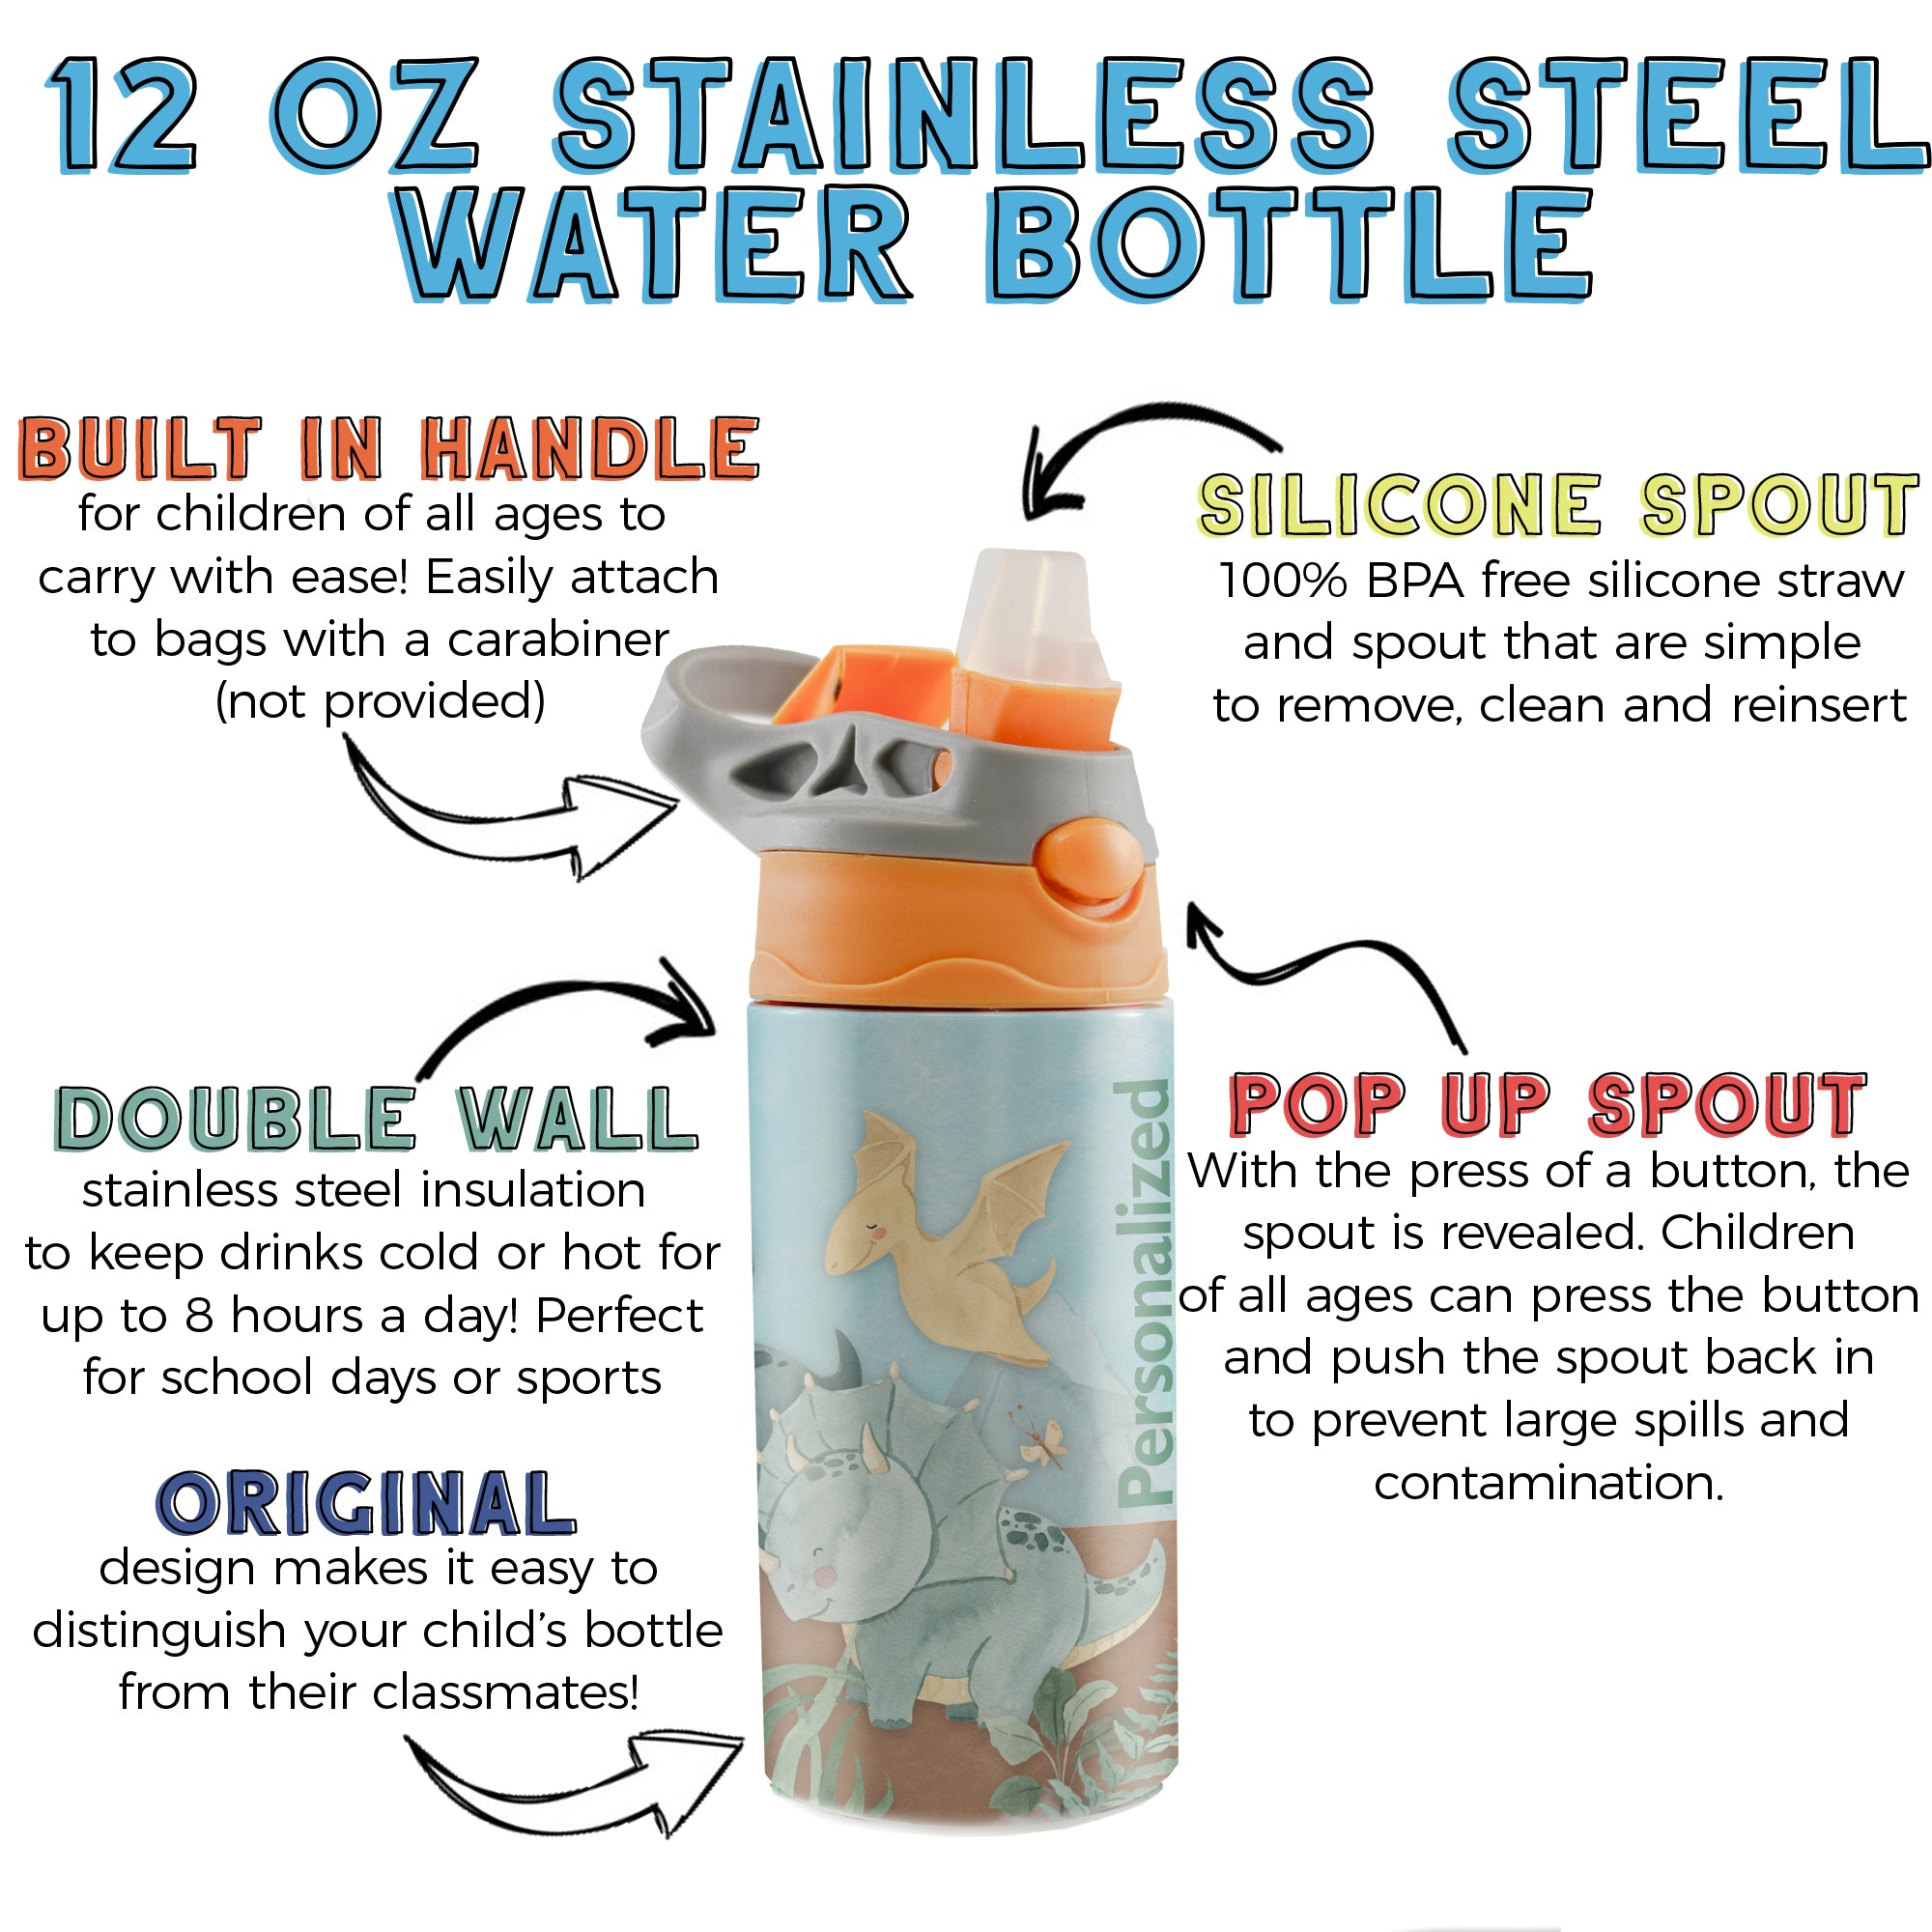 Trend Setters Original (Dinosaurs - Personalize with Name) 12 oz Stainless Steel Water Bottle with Orange and Grey Lid